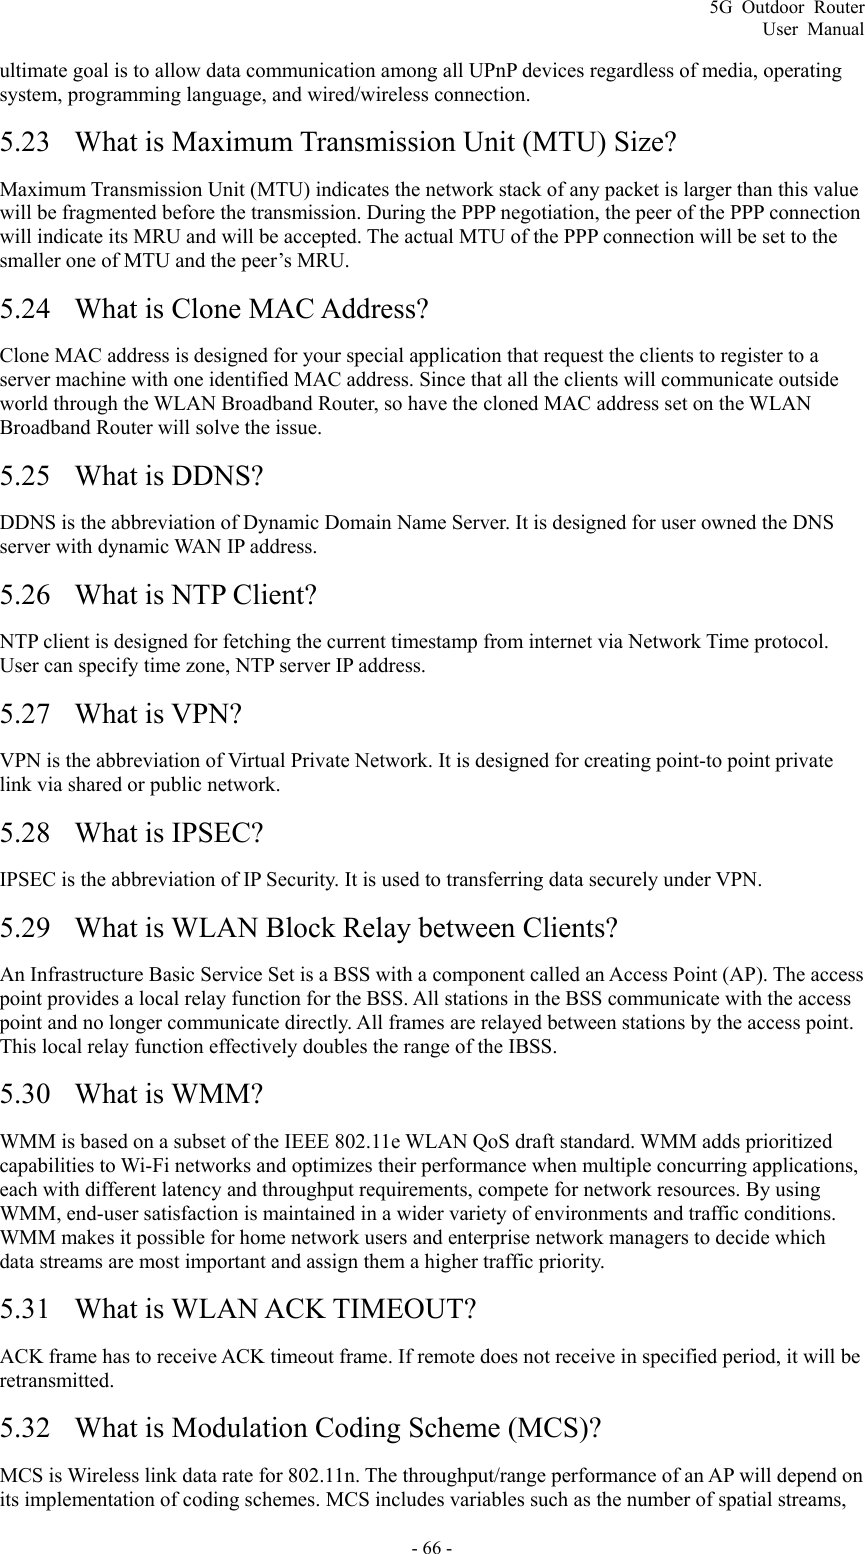 5G Outdoor Router User Manual - 66 - ultimate goal is to allow data communication among all UPnP devices regardless of media, operating system, programming language, and wired/wireless connection. 5.23 What is Maximum Transmission Unit (MTU) Size? Maximum Transmission Unit (MTU) indicates the network stack of any packet is larger than this value will be fragmented before the transmission. During the PPP negotiation, the peer of the PPP connection will indicate its MRU and will be accepted. The actual MTU of the PPP connection will be set to the smaller one of MTU and the peer’s MRU. 5.24 What is Clone MAC Address? Clone MAC address is designed for your special application that request the clients to register to a server machine with one identified MAC address. Since that all the clients will communicate outside world through the WLAN Broadband Router, so have the cloned MAC address set on the WLAN Broadband Router will solve the issue. 5.25 What is DDNS? DDNS is the abbreviation of Dynamic Domain Name Server. It is designed for user owned the DNS server with dynamic WAN IP address. 5.26 What is NTP Client? NTP client is designed for fetching the current timestamp from internet via Network Time protocol. User can specify time zone, NTP server IP address. 5.27 What is VPN? VPN is the abbreviation of Virtual Private Network. It is designed for creating point-to point private link via shared or public network. 5.28 What is IPSEC? IPSEC is the abbreviation of IP Security. It is used to transferring data securely under VPN. 5.29 What is WLAN Block Relay between Clients? An Infrastructure Basic Service Set is a BSS with a component called an Access Point (AP). The access point provides a local relay function for the BSS. All stations in the BSS communicate with the access point and no longer communicate directly. All frames are relayed between stations by the access point. This local relay function effectively doubles the range of the IBSS. 5.30 What is WMM? WMM is based on a subset of the IEEE 802.11e WLAN QoS draft standard. WMM adds prioritized capabilities to Wi-Fi networks and optimizes their performance when multiple concurring applications, each with different latency and throughput requirements, compete for network resources. By using WMM, end-user satisfaction is maintained in a wider variety of environments and traffic conditions. WMM makes it possible for home network users and enterprise network managers to decide which data streams are most important and assign them a higher traffic priority. 5.31 What is WLAN ACK TIMEOUT? ACK frame has to receive ACK timeout frame. If remote does not receive in specified period, it will be retransmitted. 5.32 What is Modulation Coding Scheme (MCS)? MCS is Wireless link data rate for 802.11n. The throughput/range performance of an AP will depend on its implementation of coding schemes. MCS includes variables such as the number of spatial streams, 